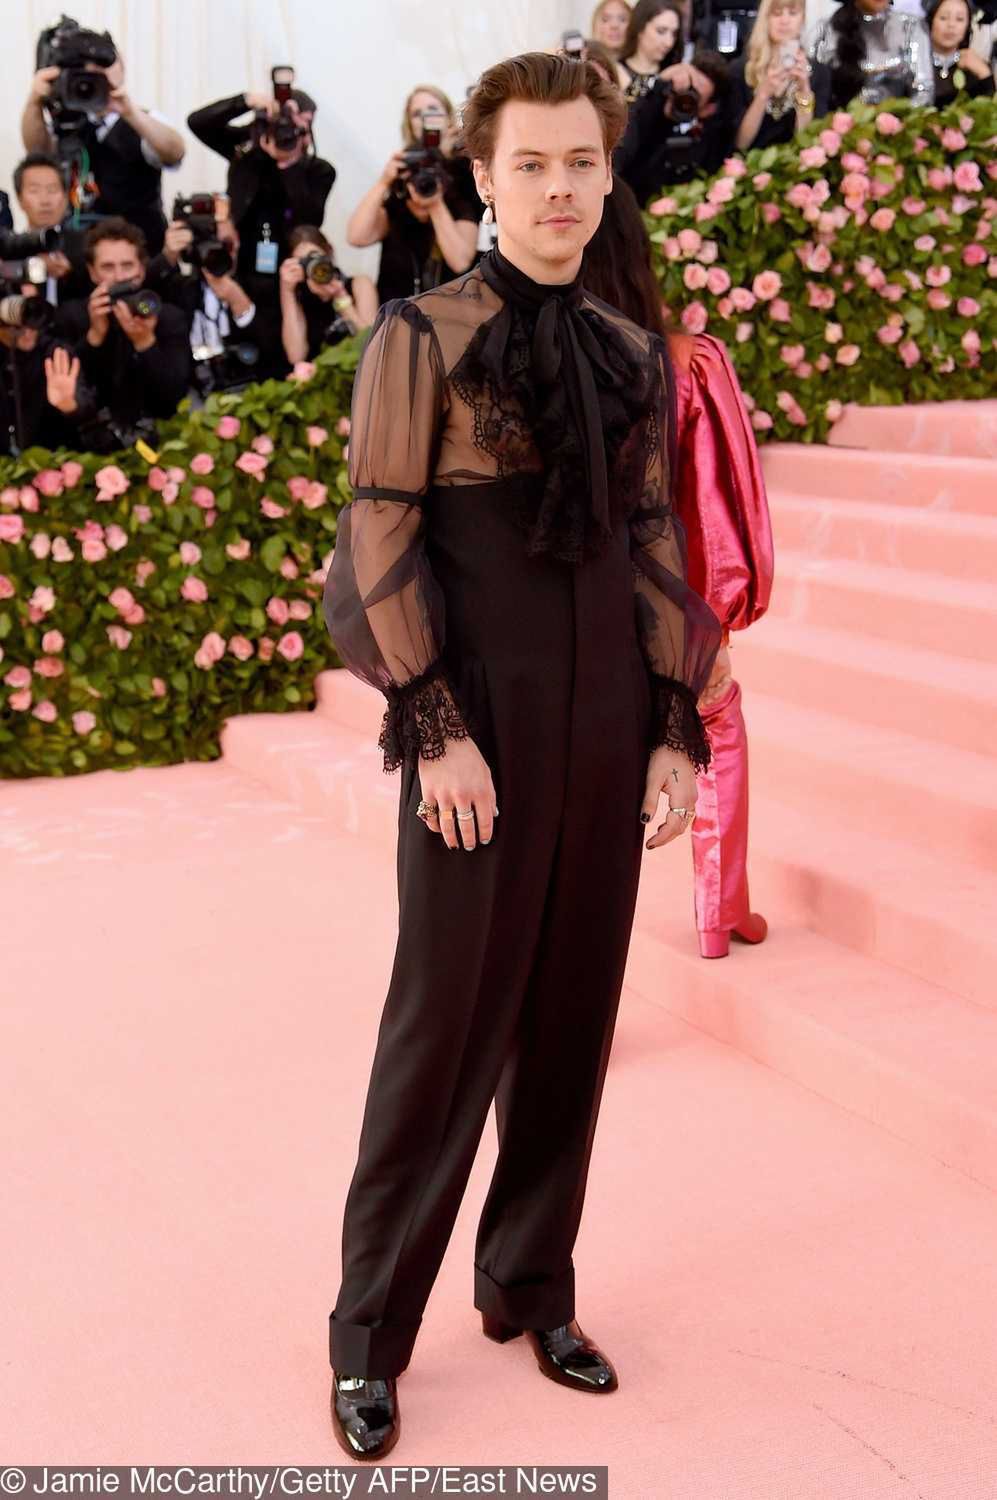 NEW YORK, NEW YORK - MAY 06: Harry Styles attends The 2019 Met Gala Celebrating Camp: Notes on Fashion at Metropolitan Museum of Art on May 06, 2019 in New York City.   Jamie McCarthy/Getty Images/AFP == FOR NEWSPAPERS, INTERNET, TELCOS & TELEVISION USE ONLY ==